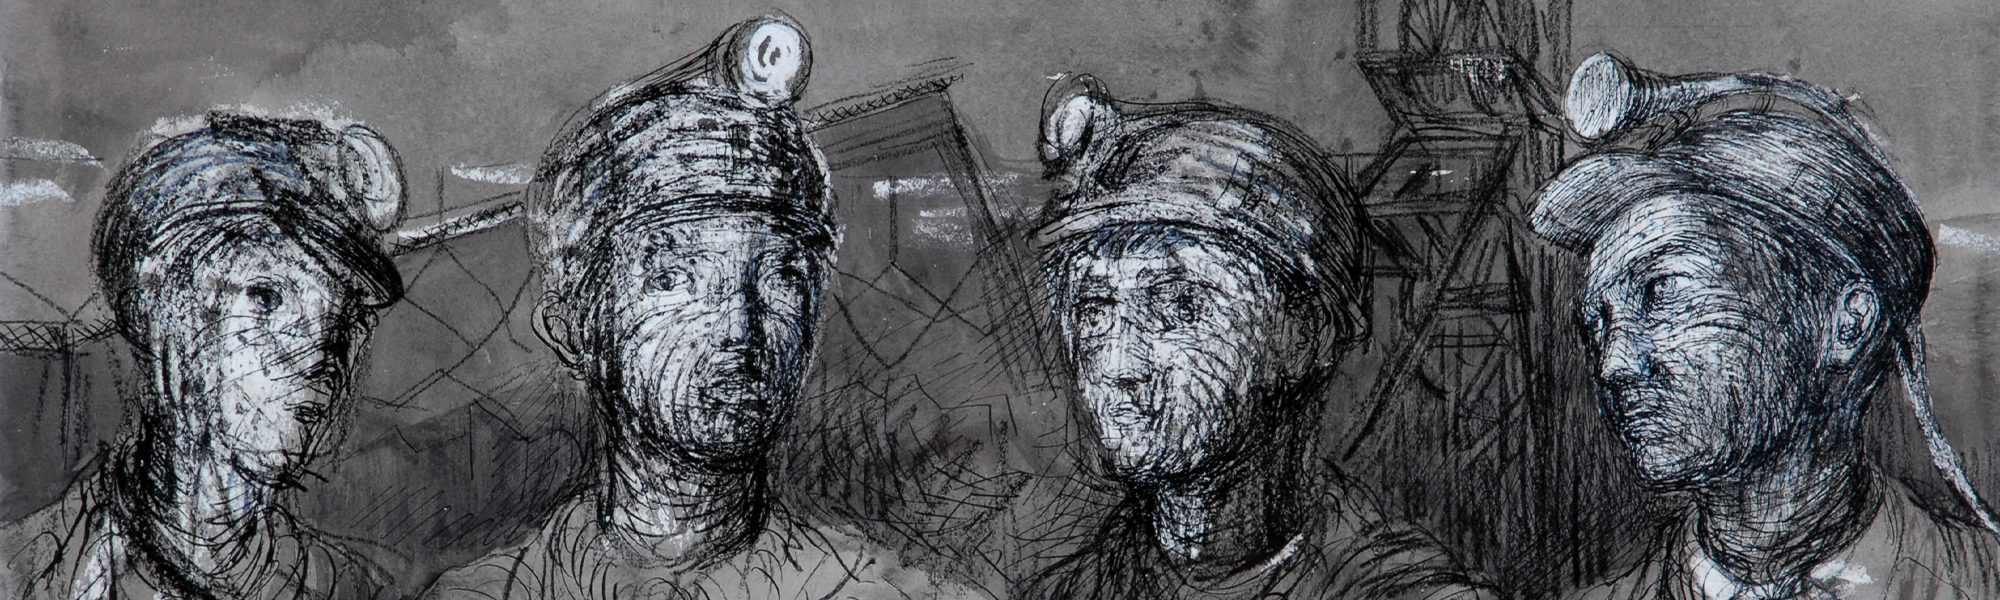 Henry Moore drawing depicting four miners